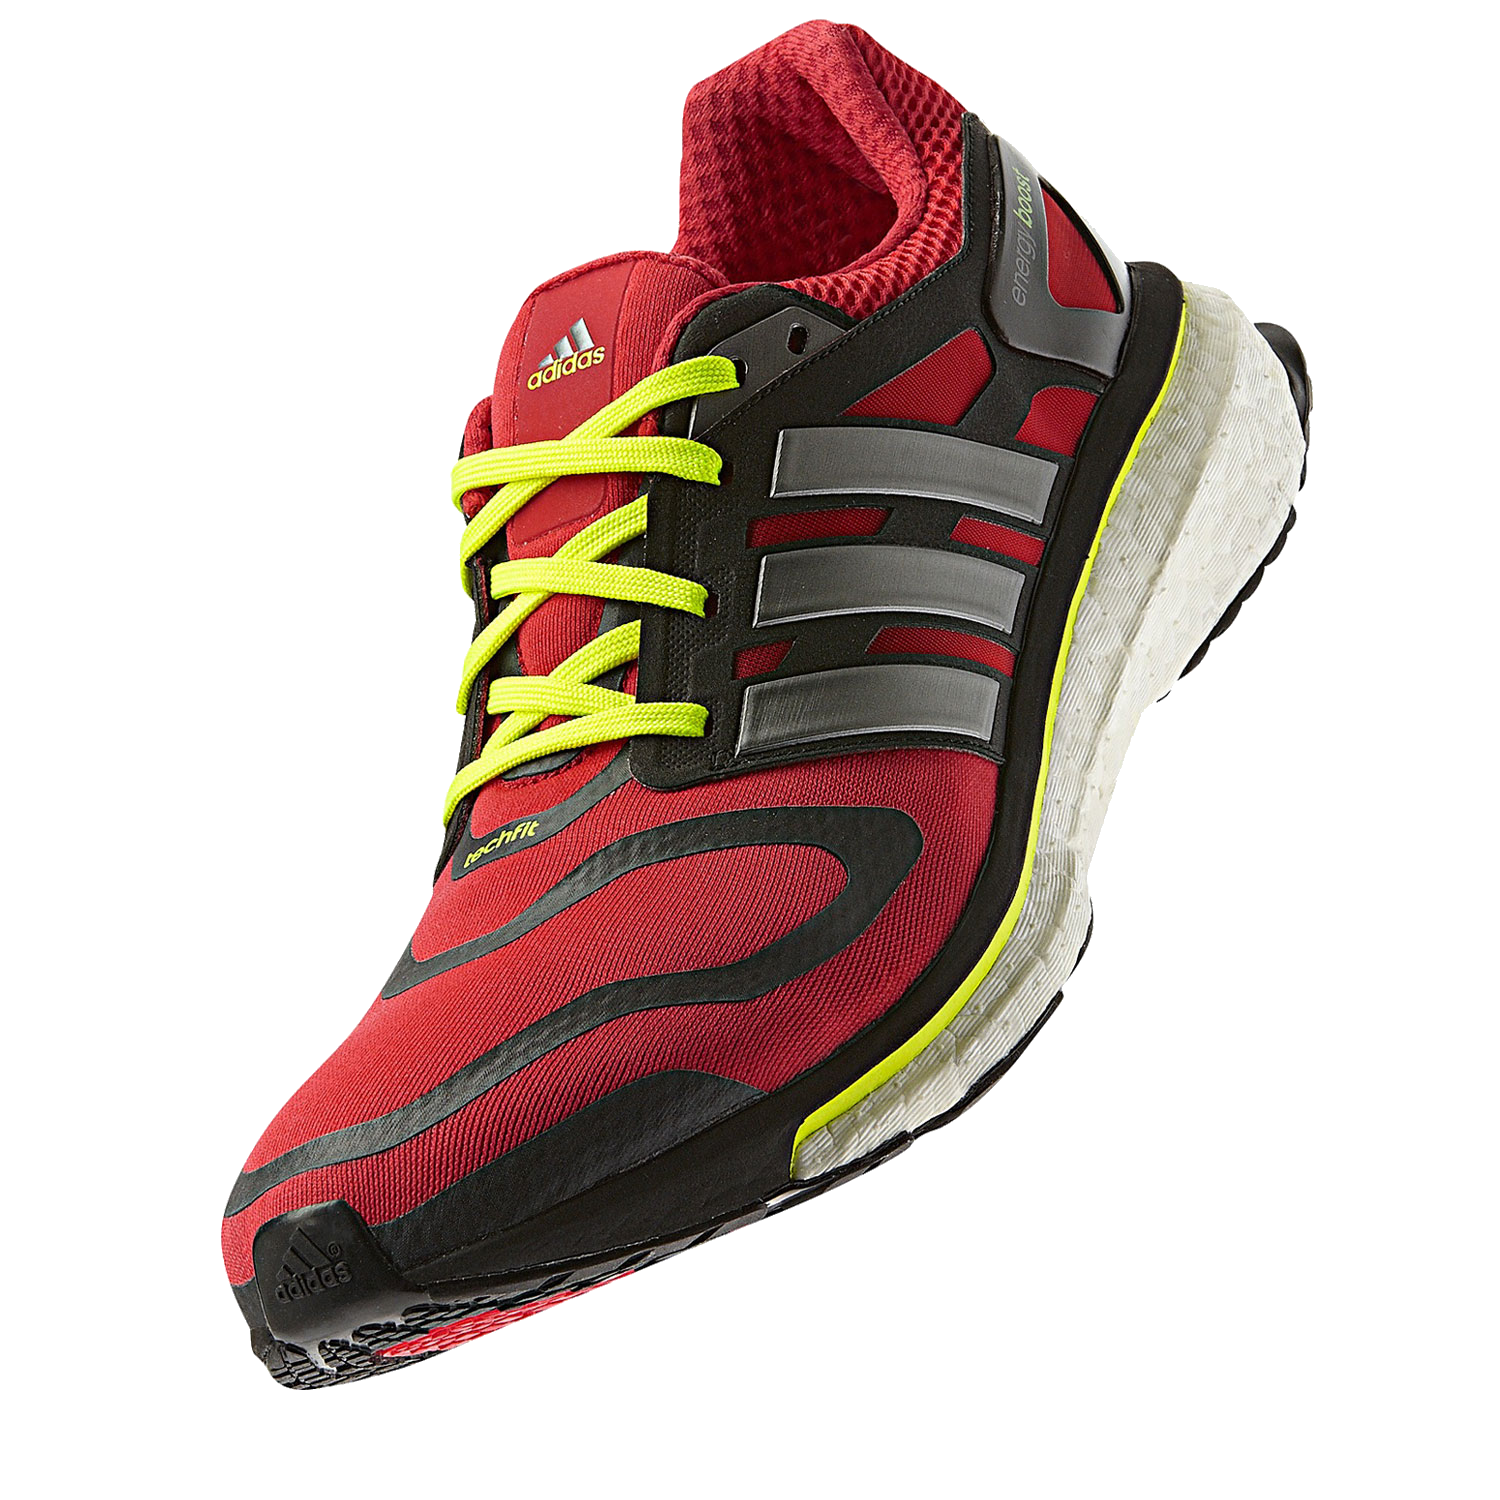 New revolutionary running shoes with cutting-edge technology now available from 0